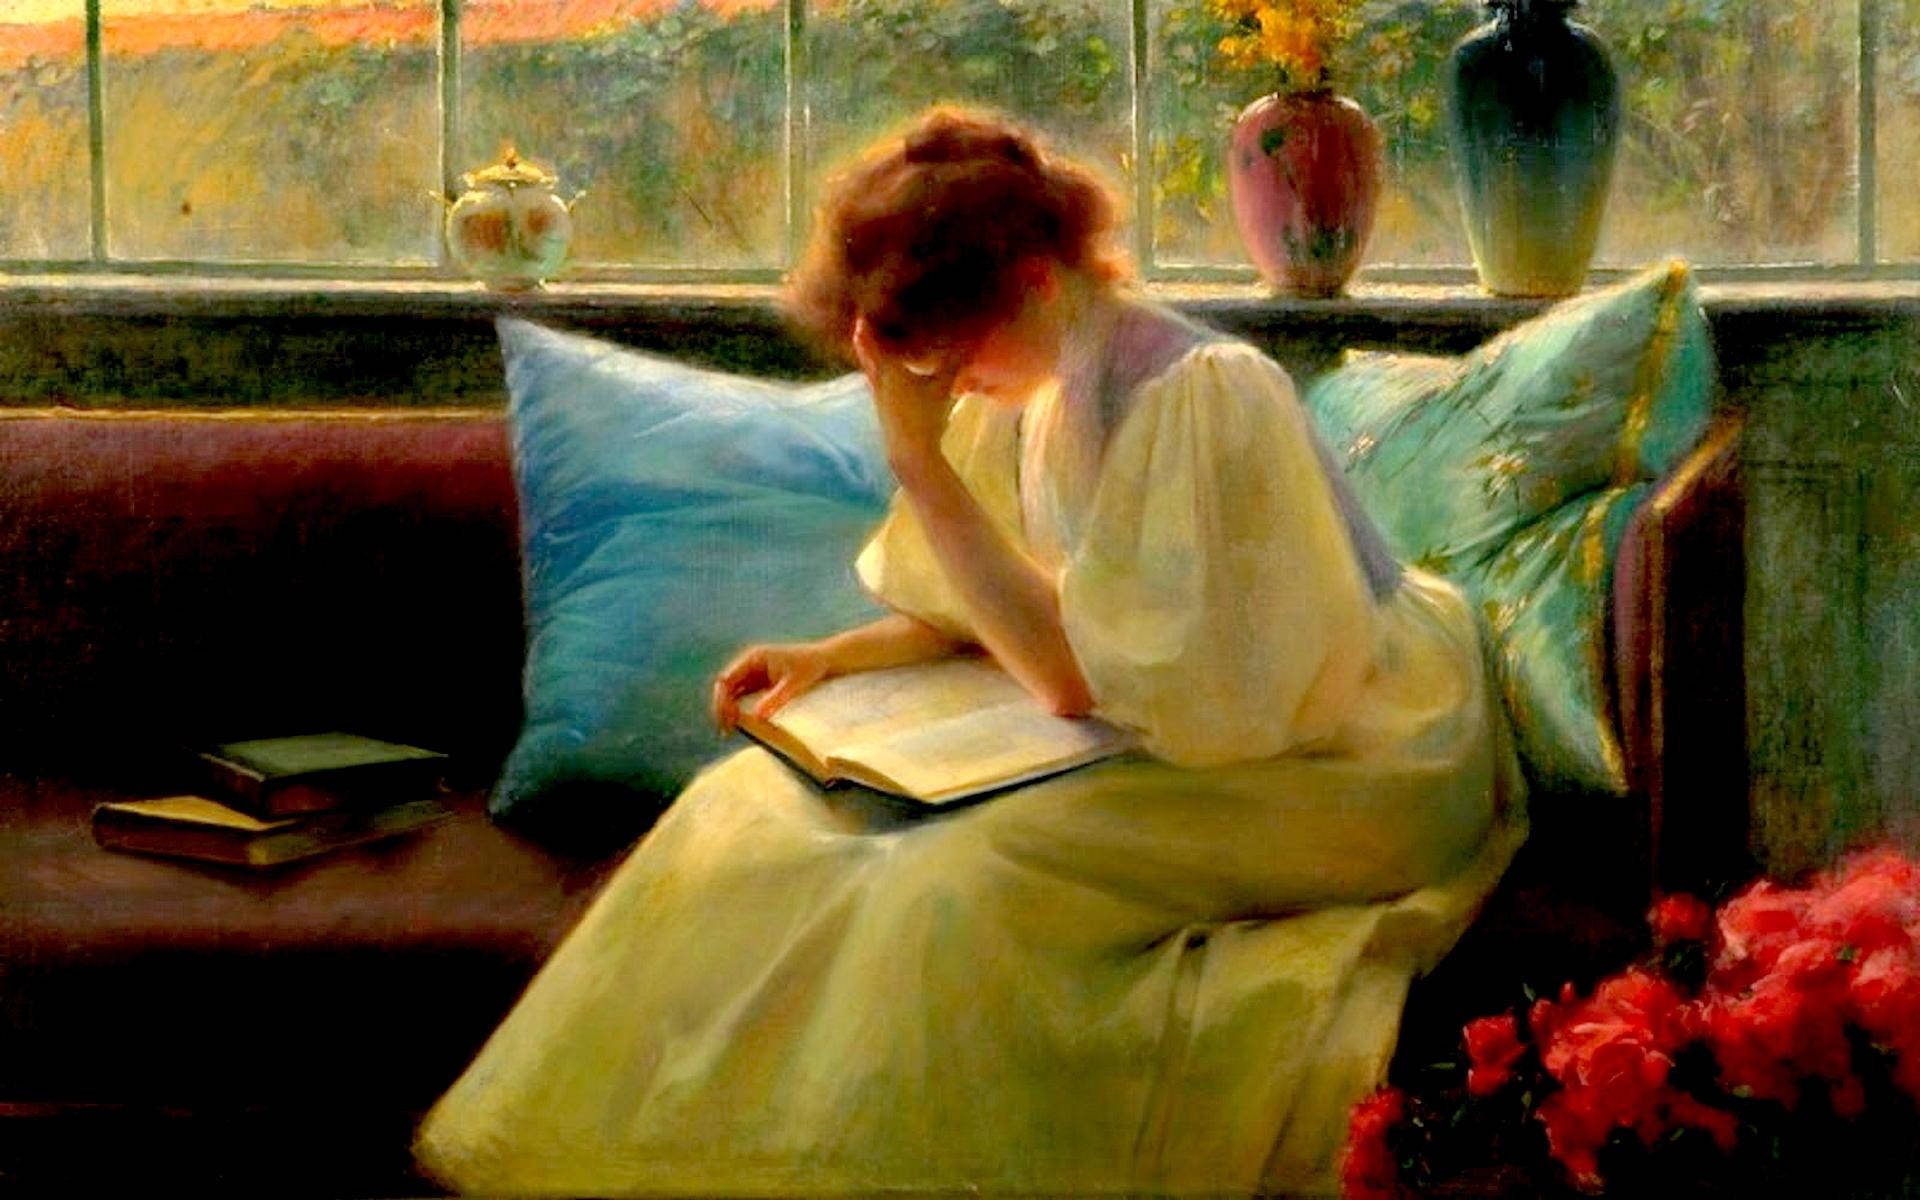 A woman engrossed in reading a book in an artistic painting. Wallpaper